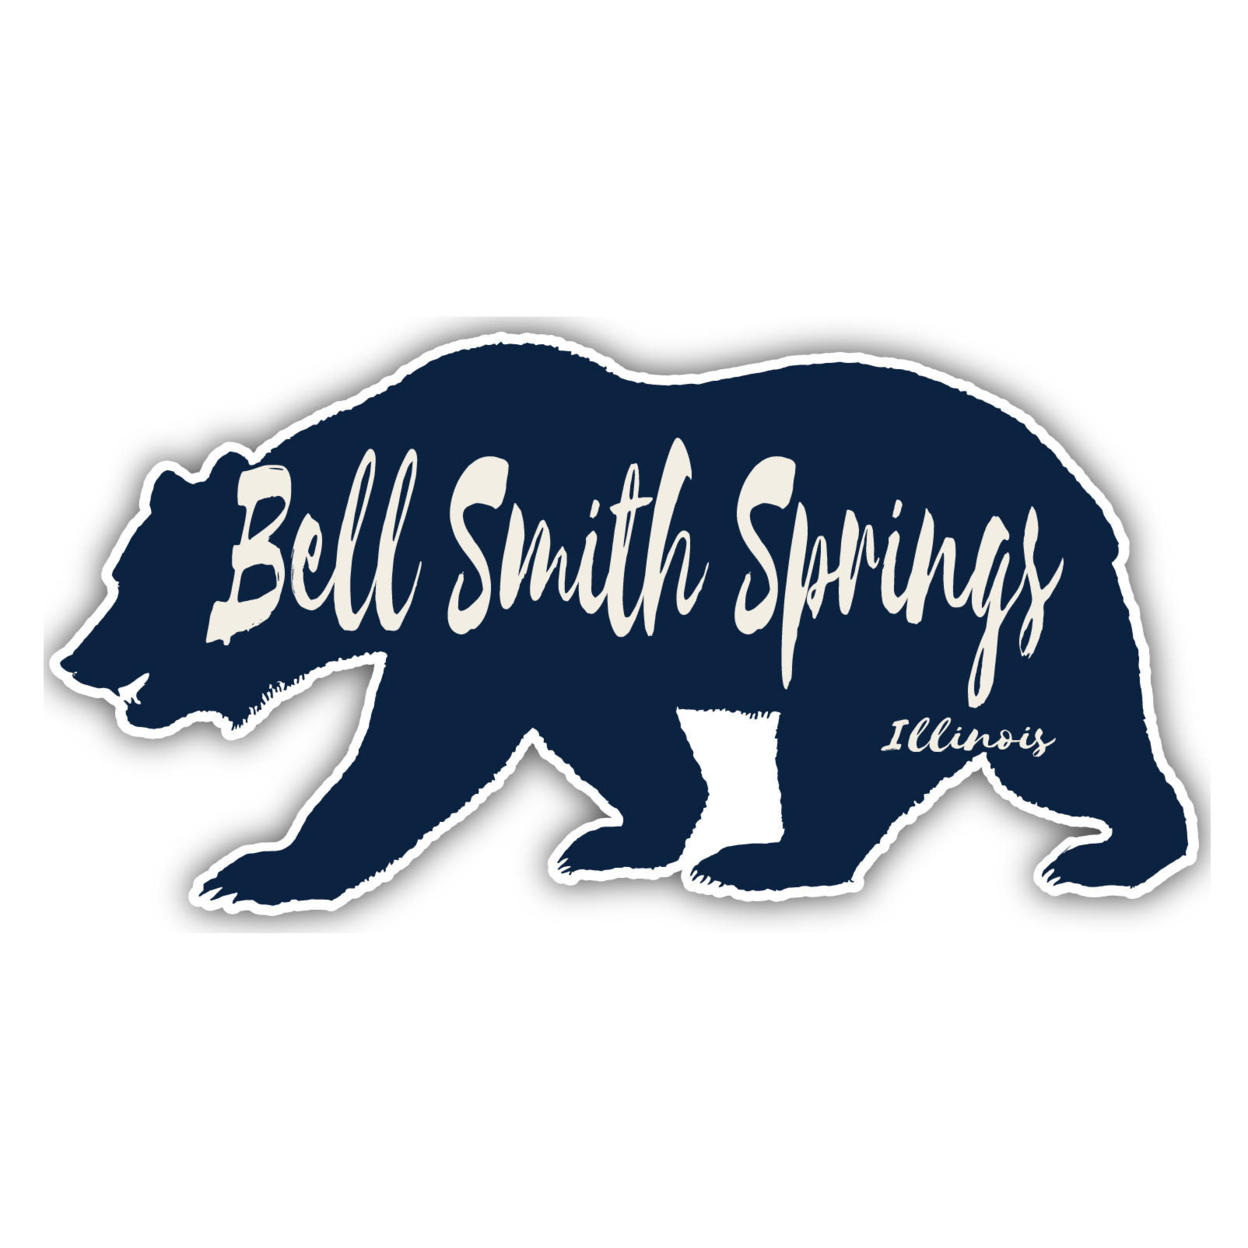 Bell Smith Springs Illinois Souvenir Decorative Stickers (Choose Theme And Size) - 4-Pack, 6-Inch, Tent